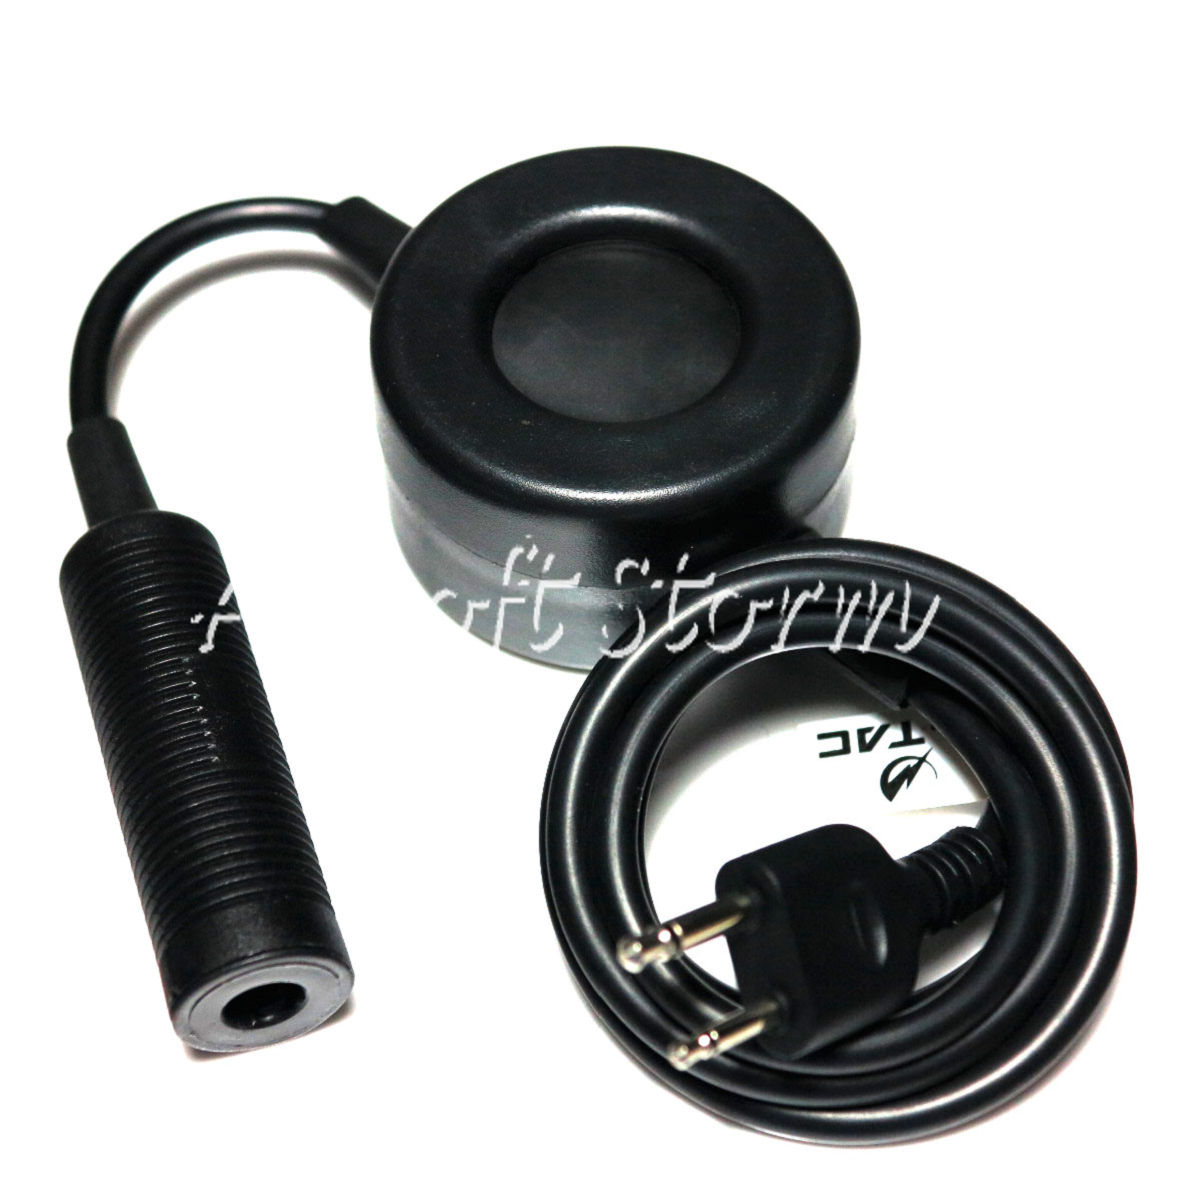 Airsoft Gear SWAT Element TCI Headset PTT for ICOM 2 Pin Radio